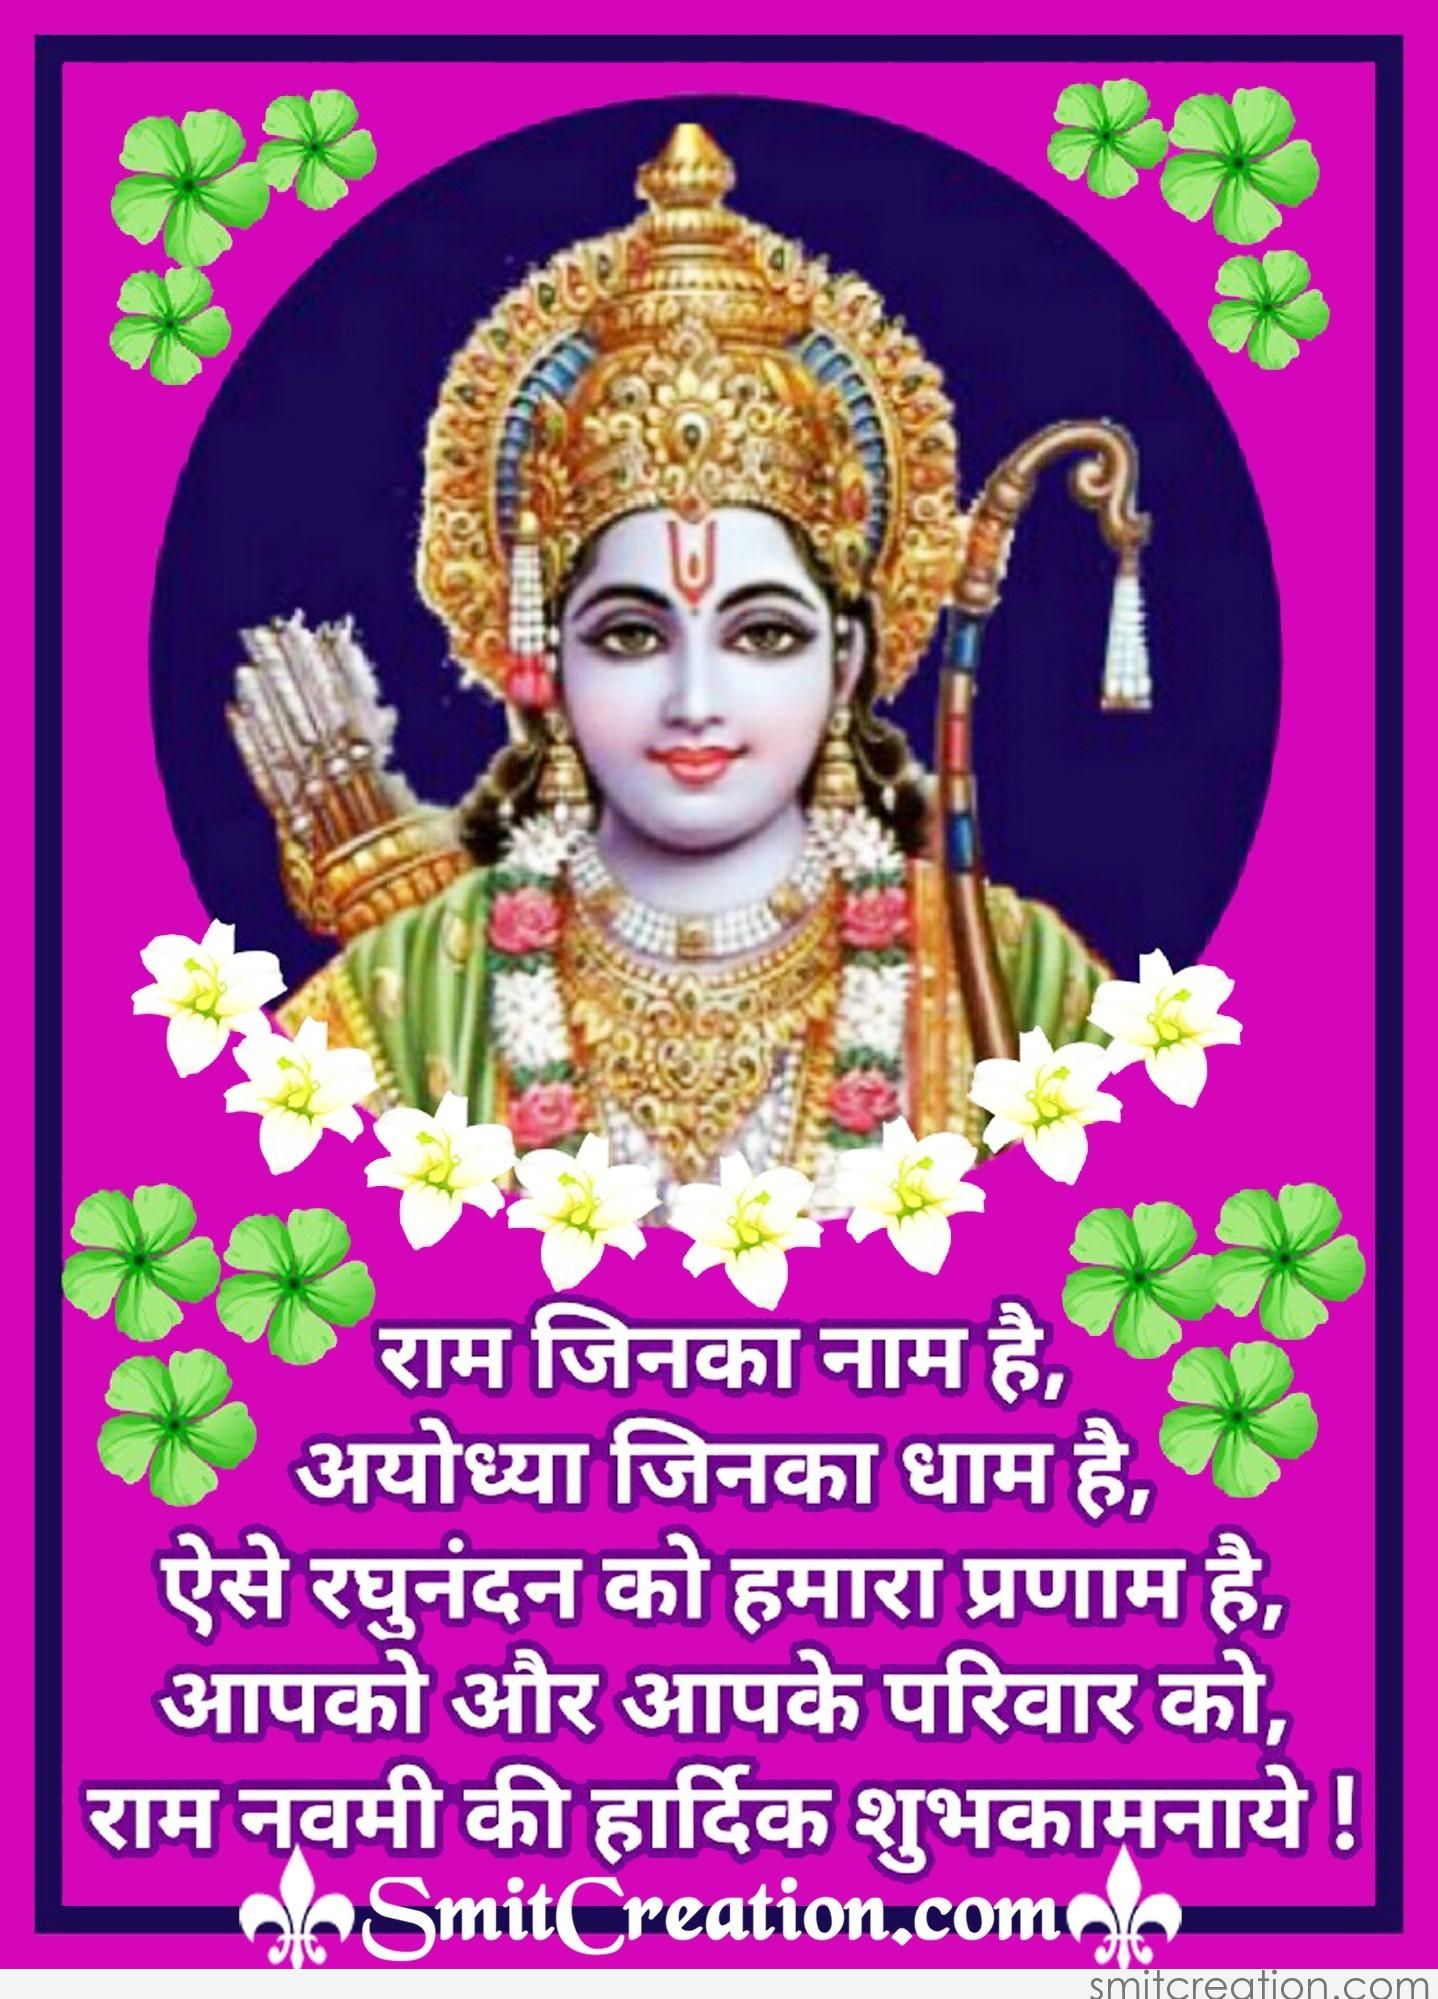 Ram Navami Wishes In Hindi Images, Pictures and Graphics